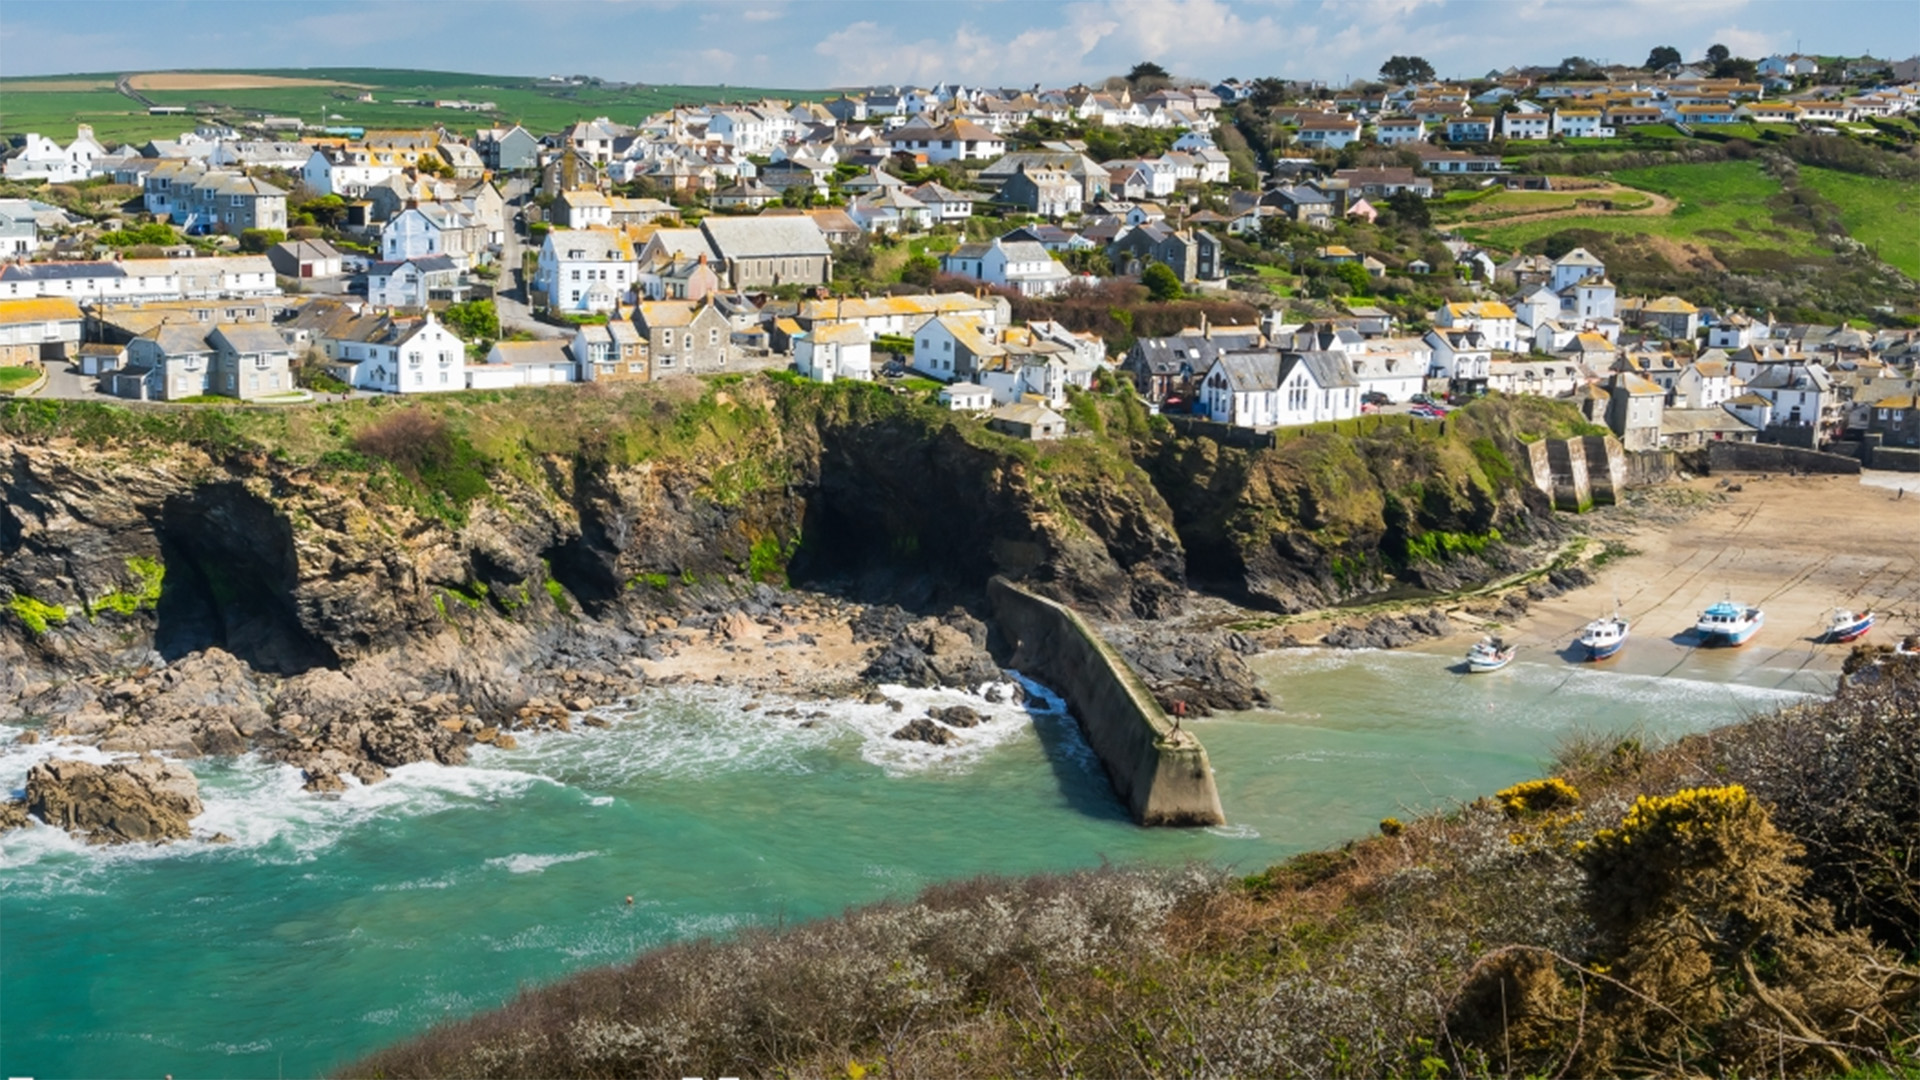 A view of a village on the English coastline